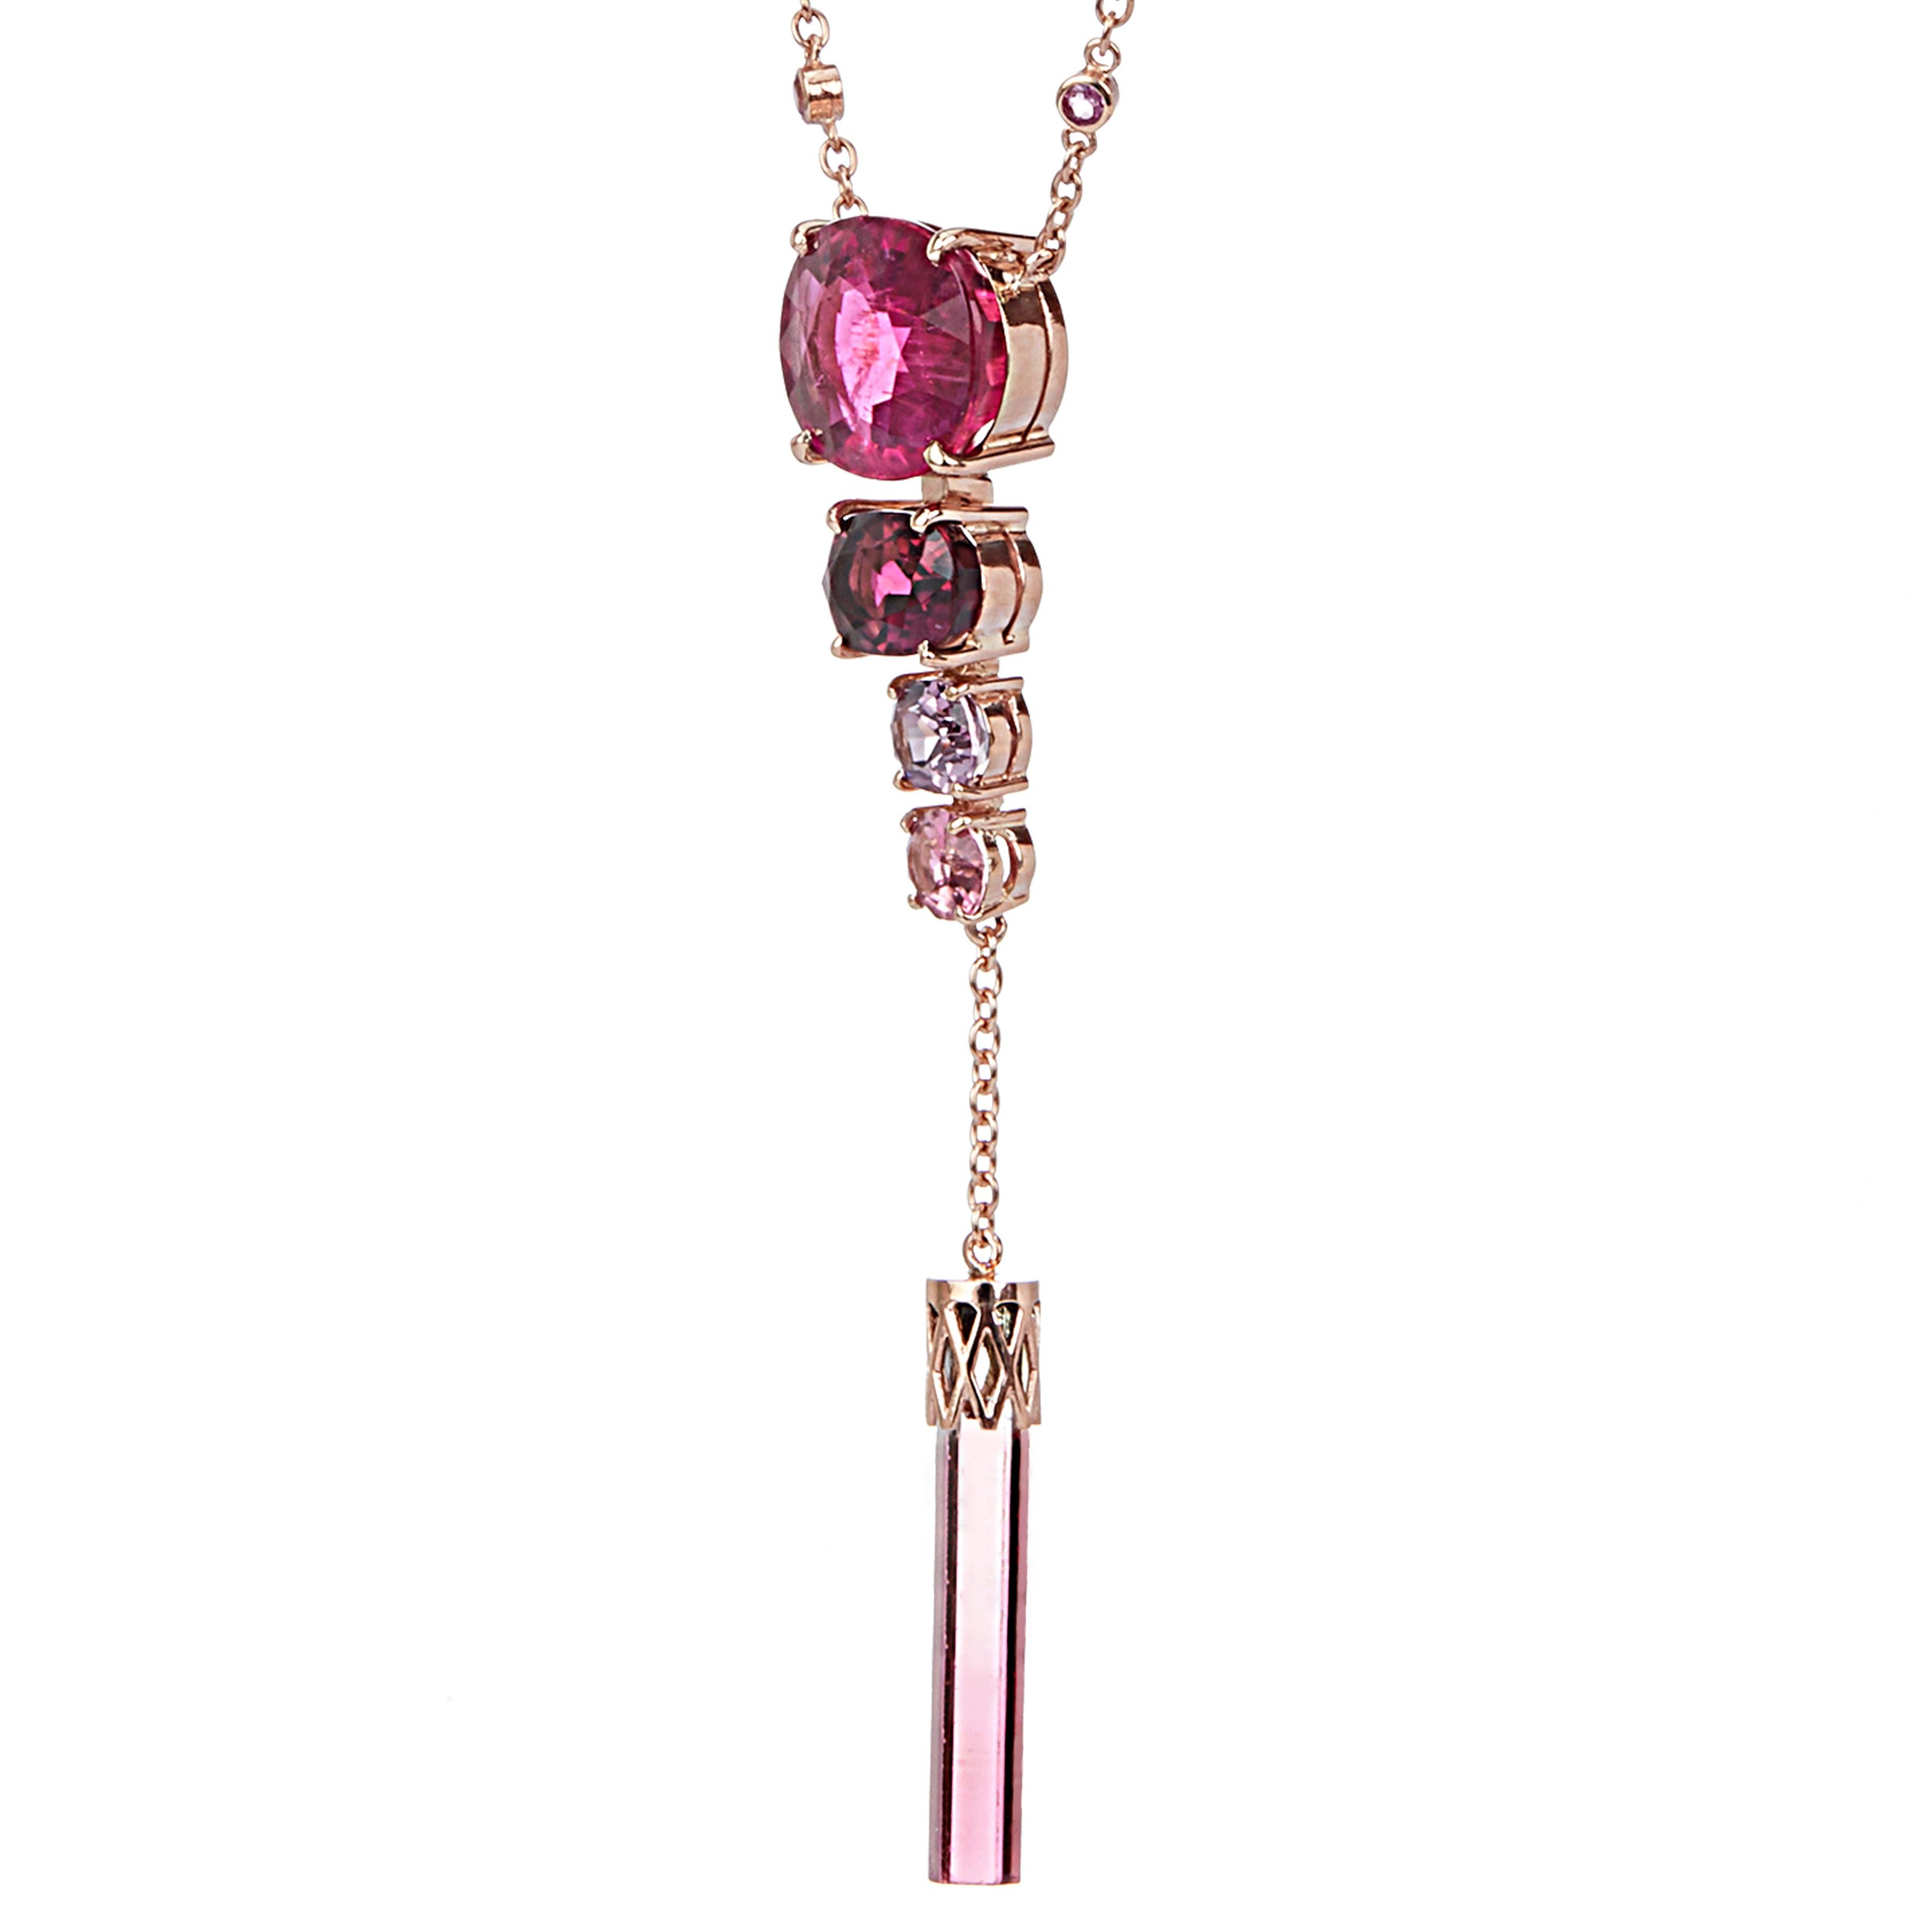 Rubellite, the king of pink gemstones, and various stones such as Tourmaline and Spinel come together to show the variation of pink colors. The tourmaline under the chain adds to its uniqueness as it has the original shape of a hexagonal